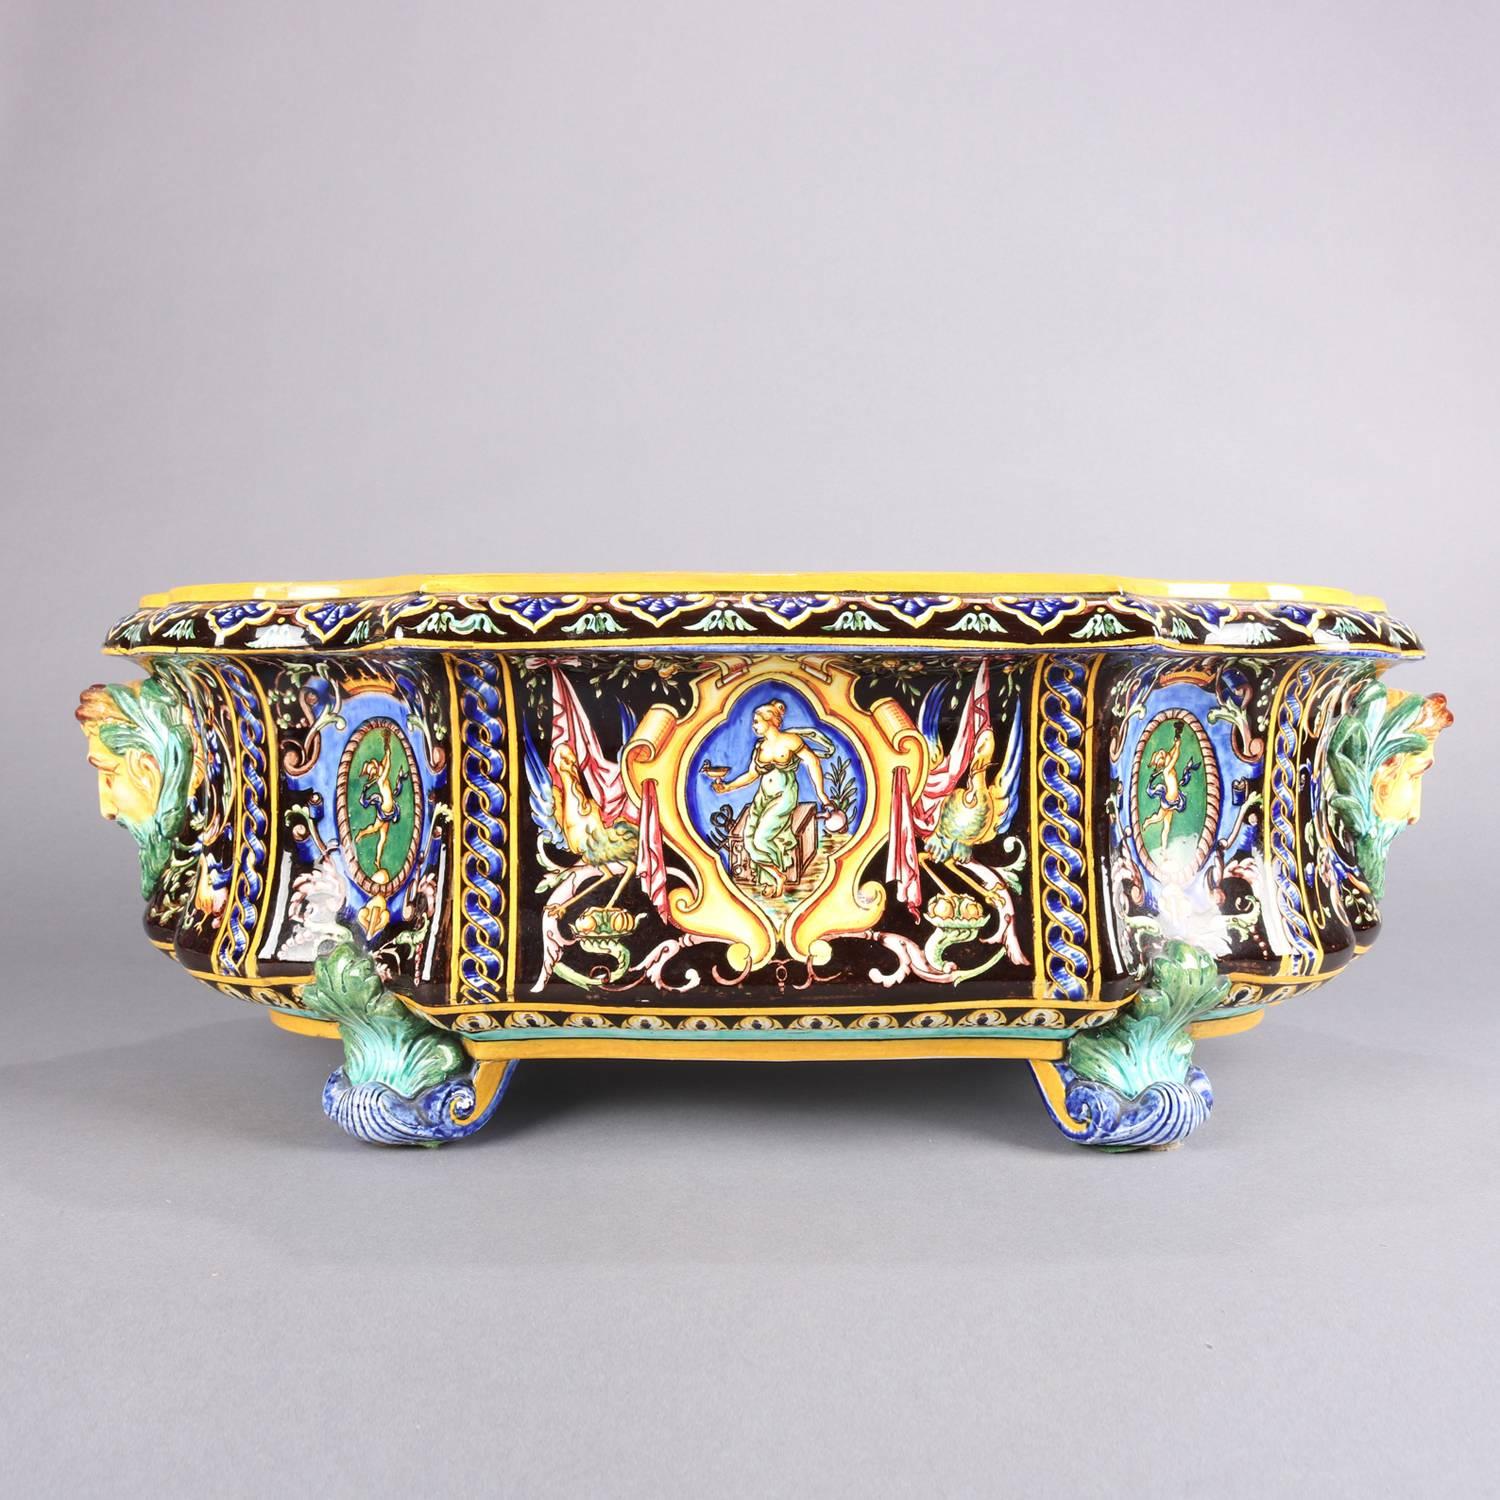 Antique Italian classical hand-painted Faience art pottery planter by Gien features shield or cartouche reserves with partial nude scenes of a woman and bird, applied male masks, raised on scroll and foliate form feet, marked on base with castle